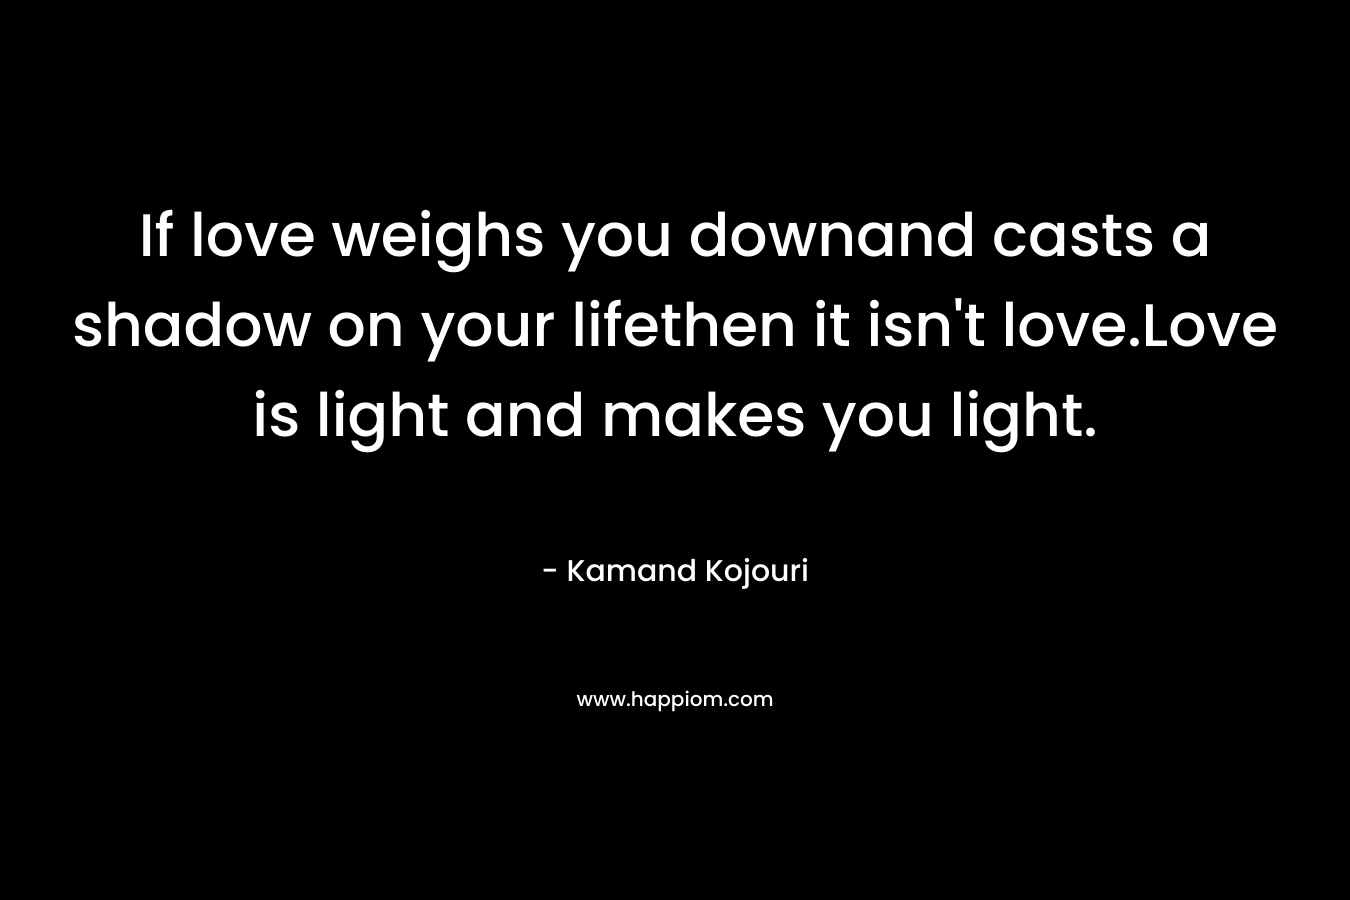 If love weighs you downand casts a shadow on your lifethen it isn't love.Love is light and makes you light.